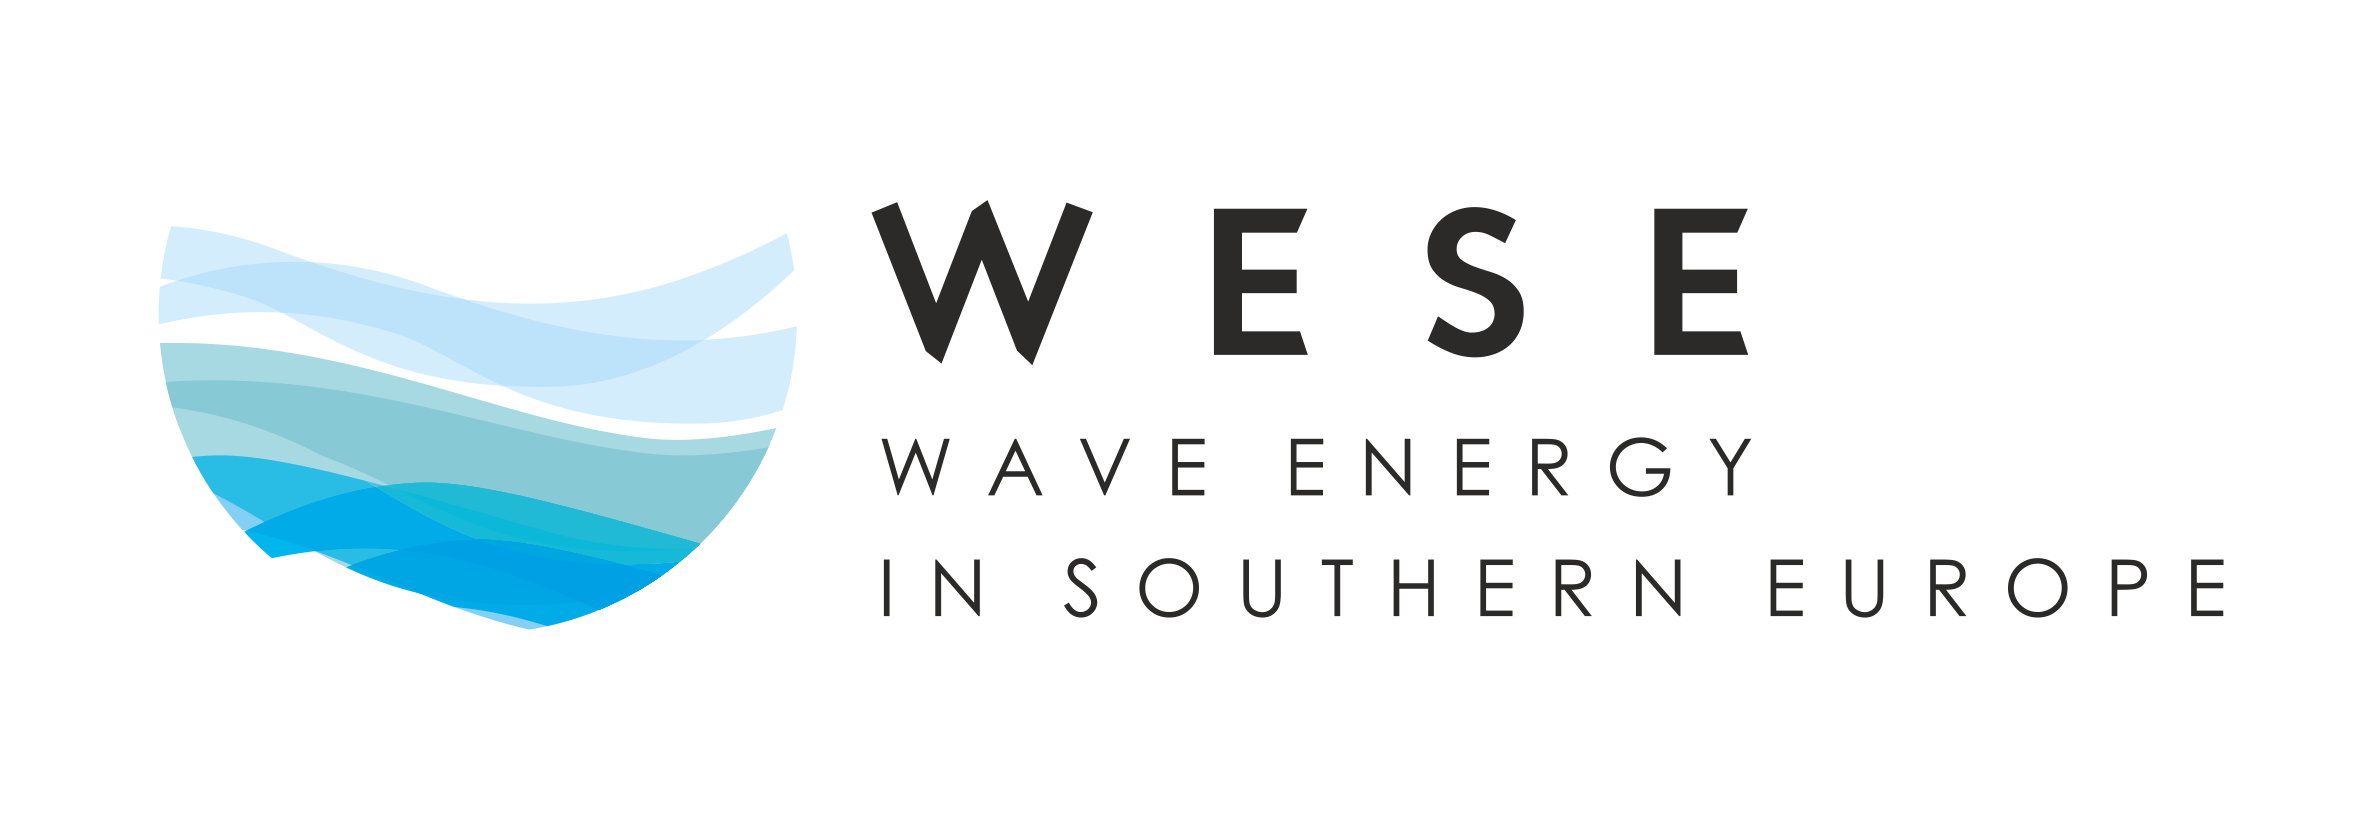 WESE: Wave Energy in Southern Europe